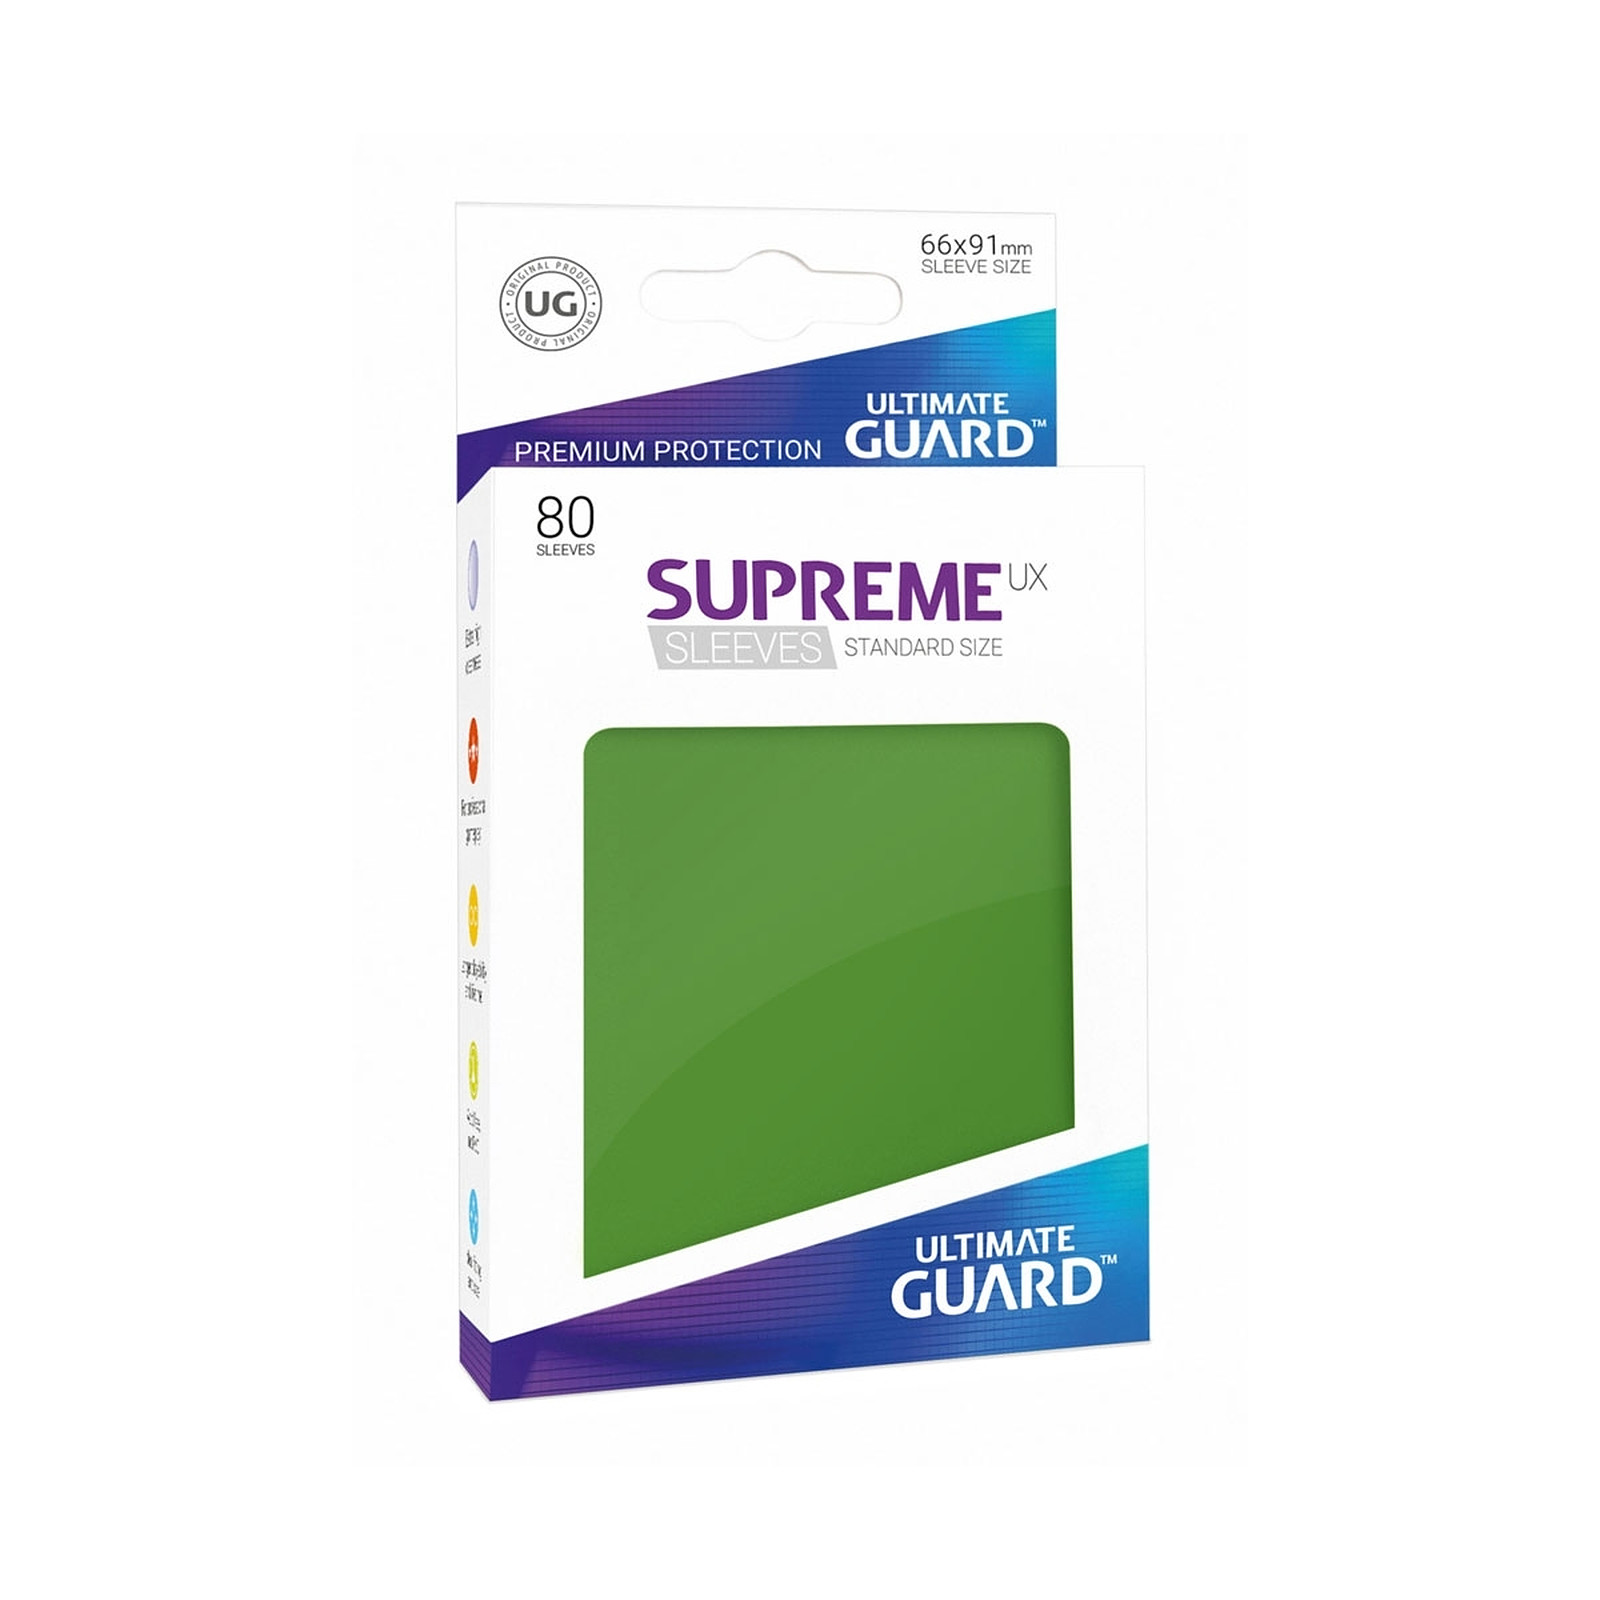 Ultimate Guard - 80 pochettes Supreme UX Sleeves taille standard Vert - Accessoire jeux Ultimate Guard